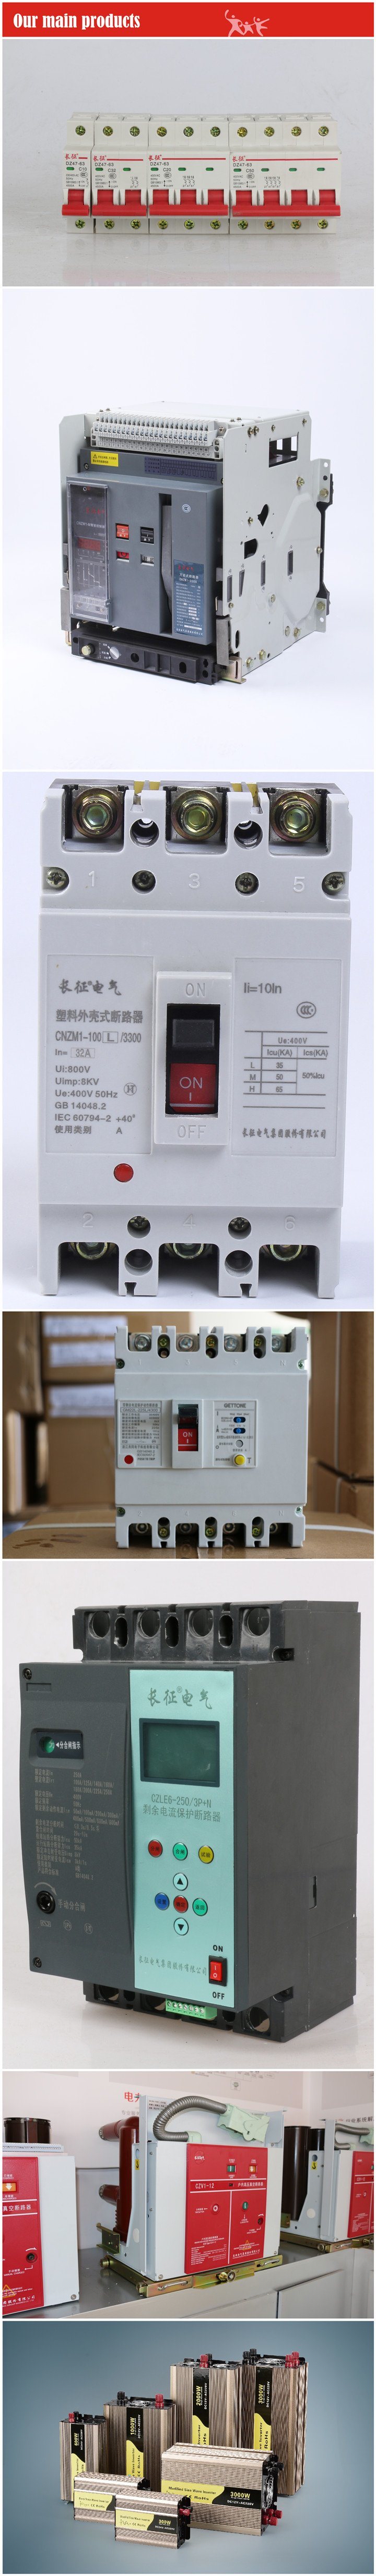 ATS Wats 1600A Dual Driver Dual Power Supply Automatic Transfer Switch for Circuit Breaker MCB RCCB